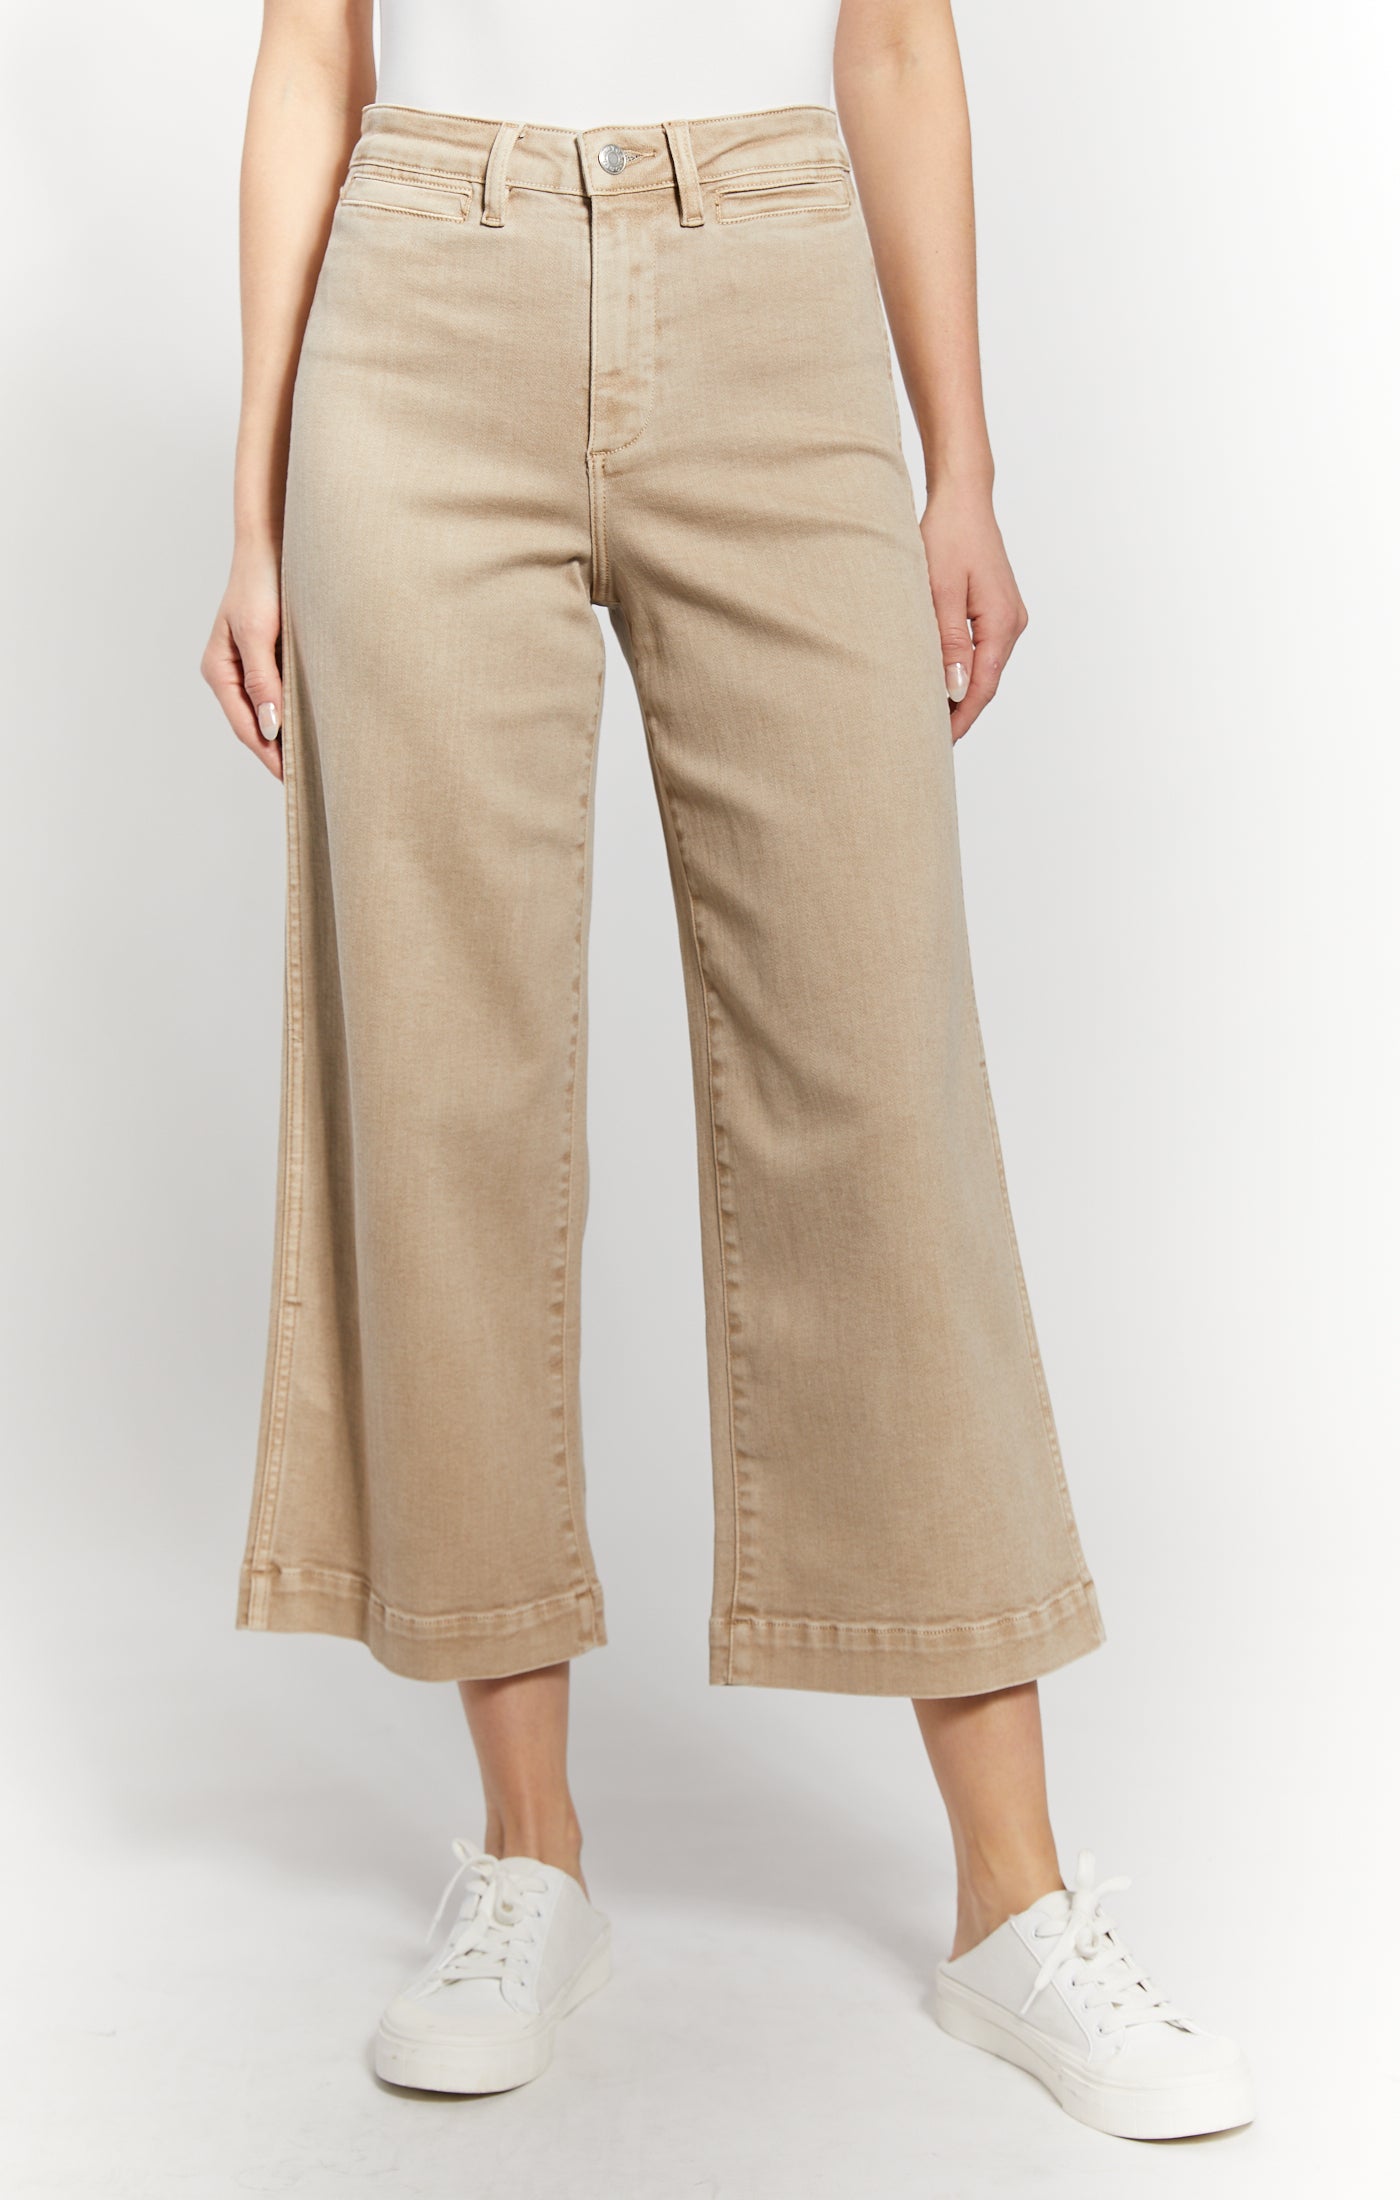 The Greer Cropped Wide Leg Denim by OAT NY